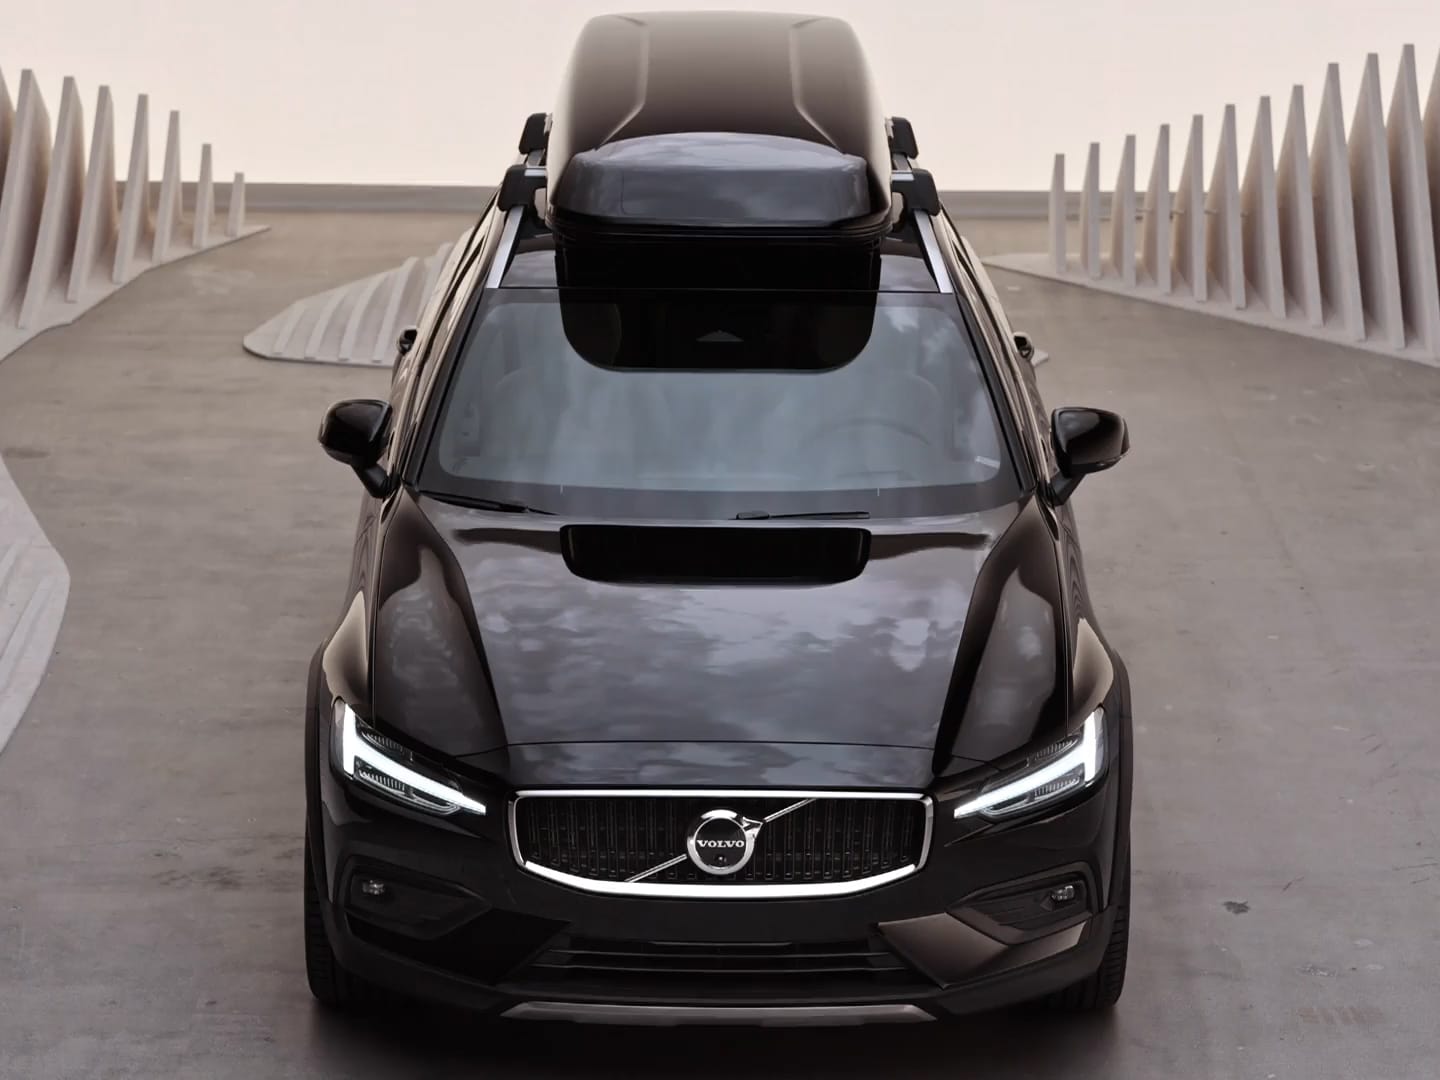 Exterior front view of the Volvo V60 Cross Country and roof box.